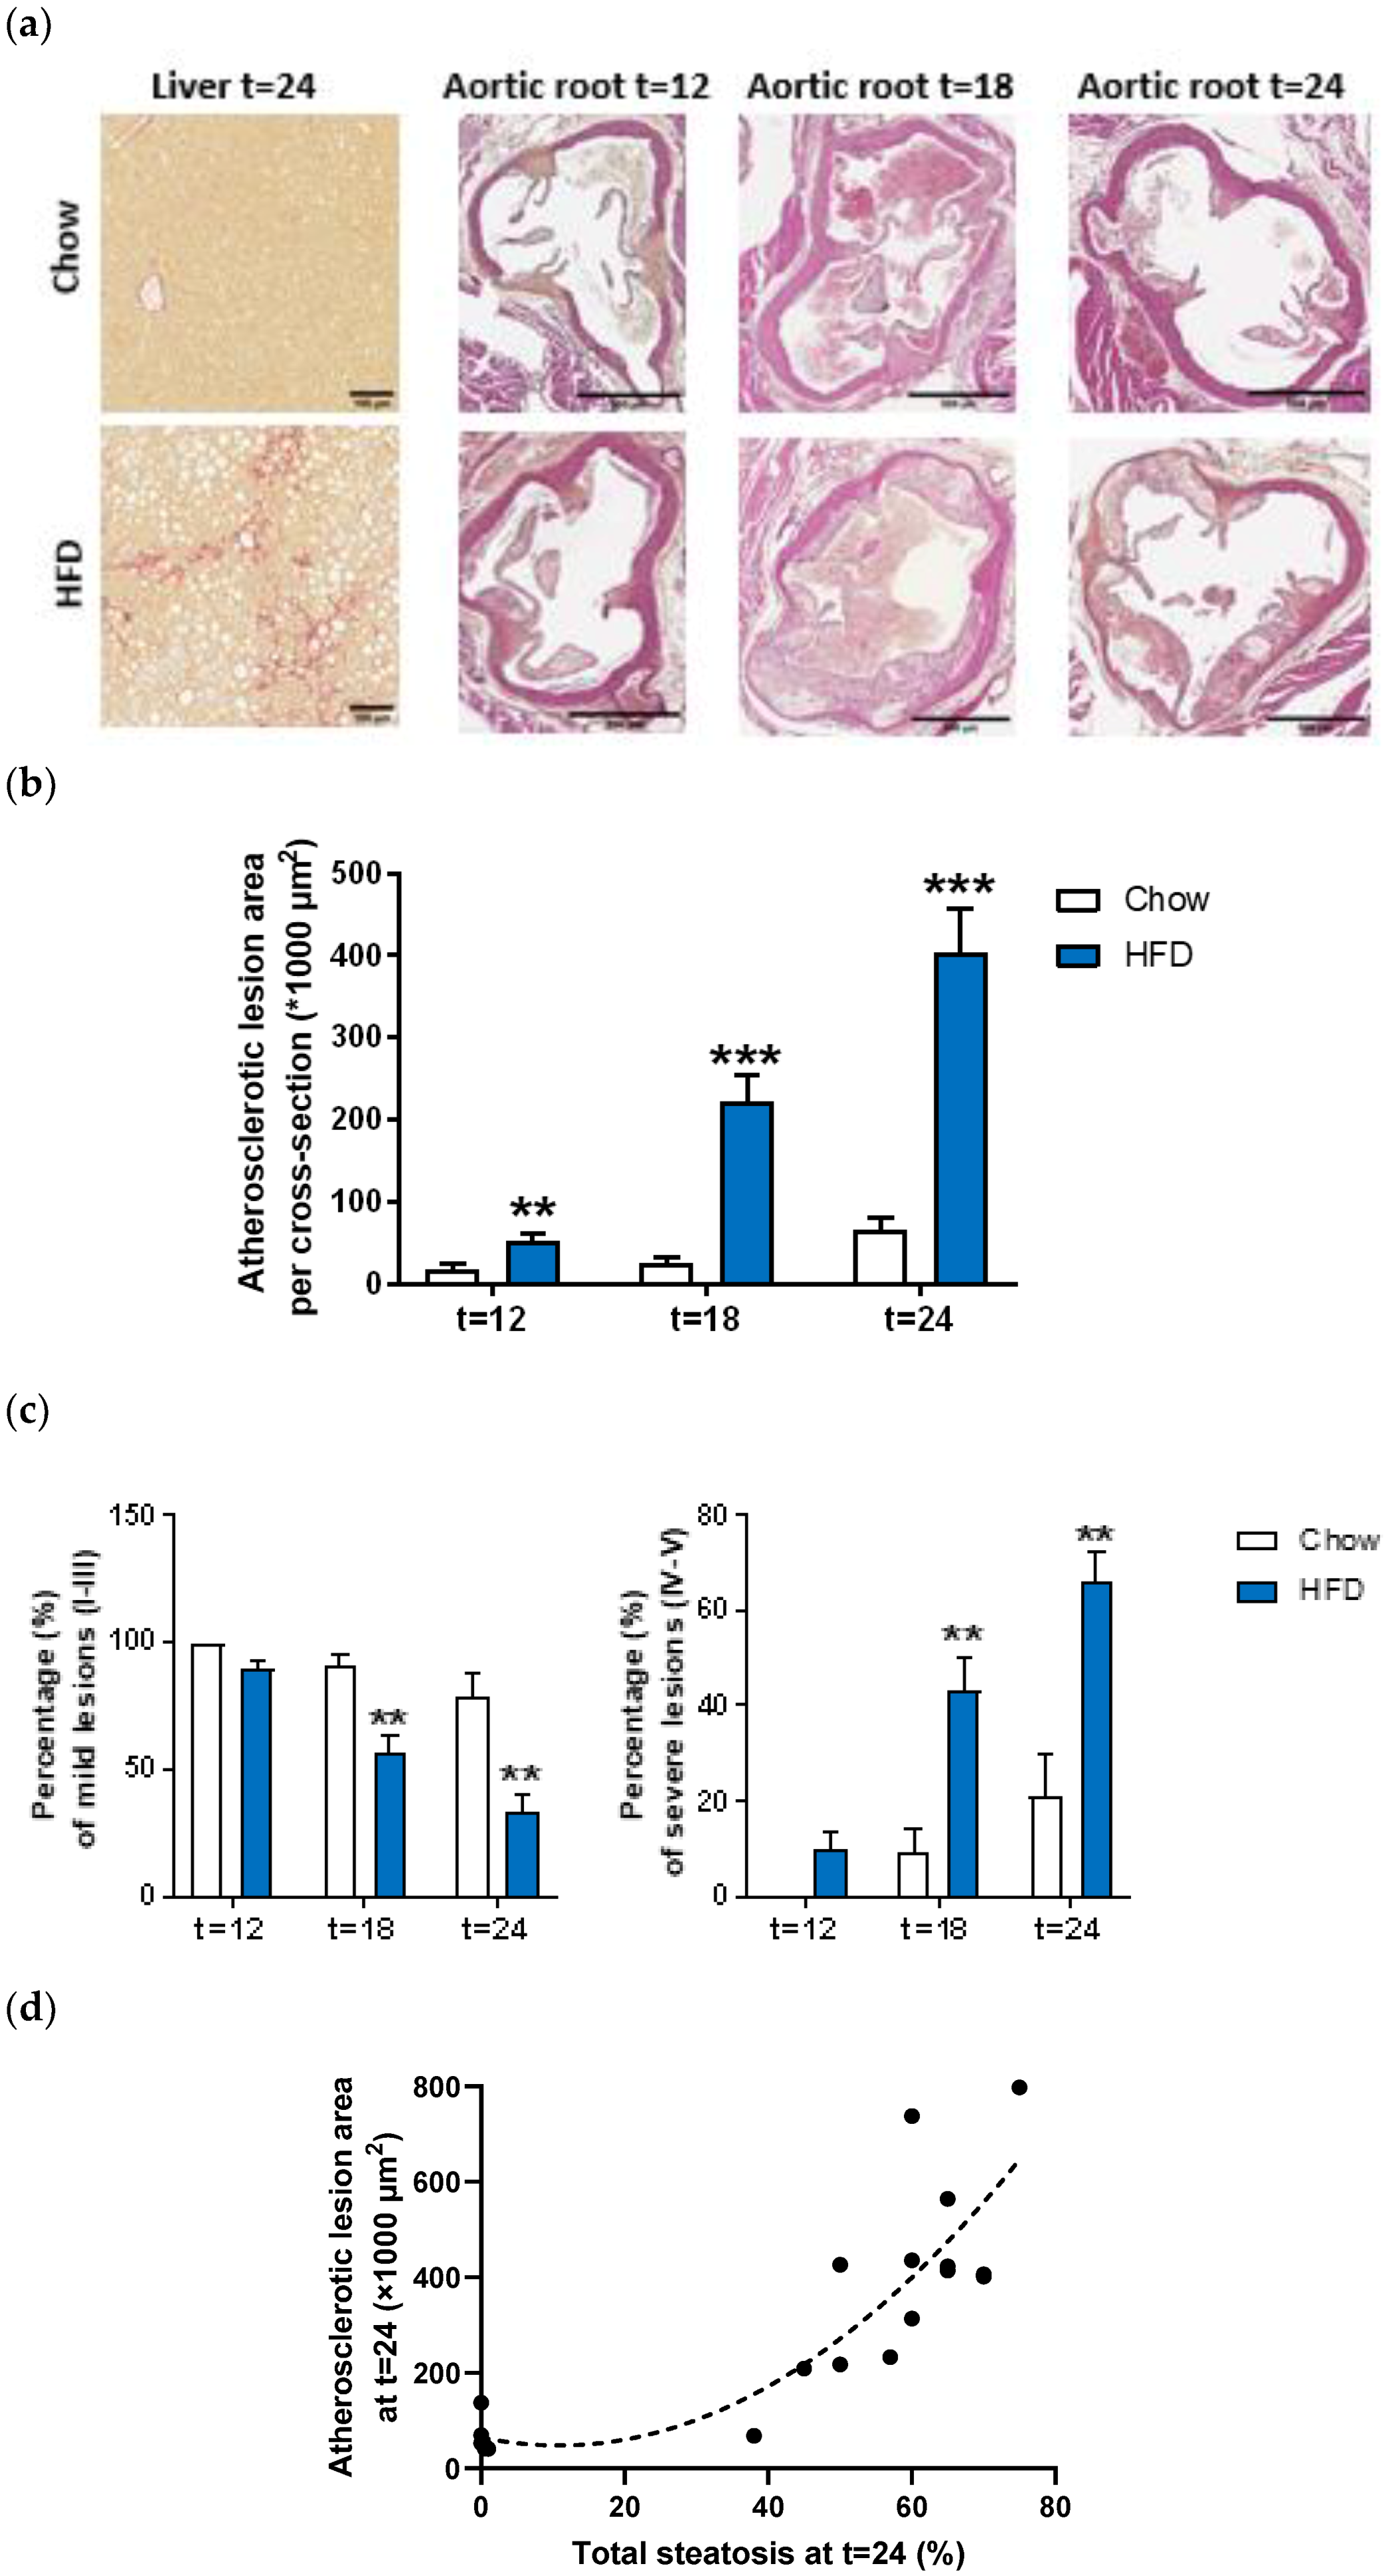 Temporal Relationships Between Circulating Levels of CC and CXC Chemokines  and Developing Atherosclerosis in Apolipoprotein E*3 Leiden Mice